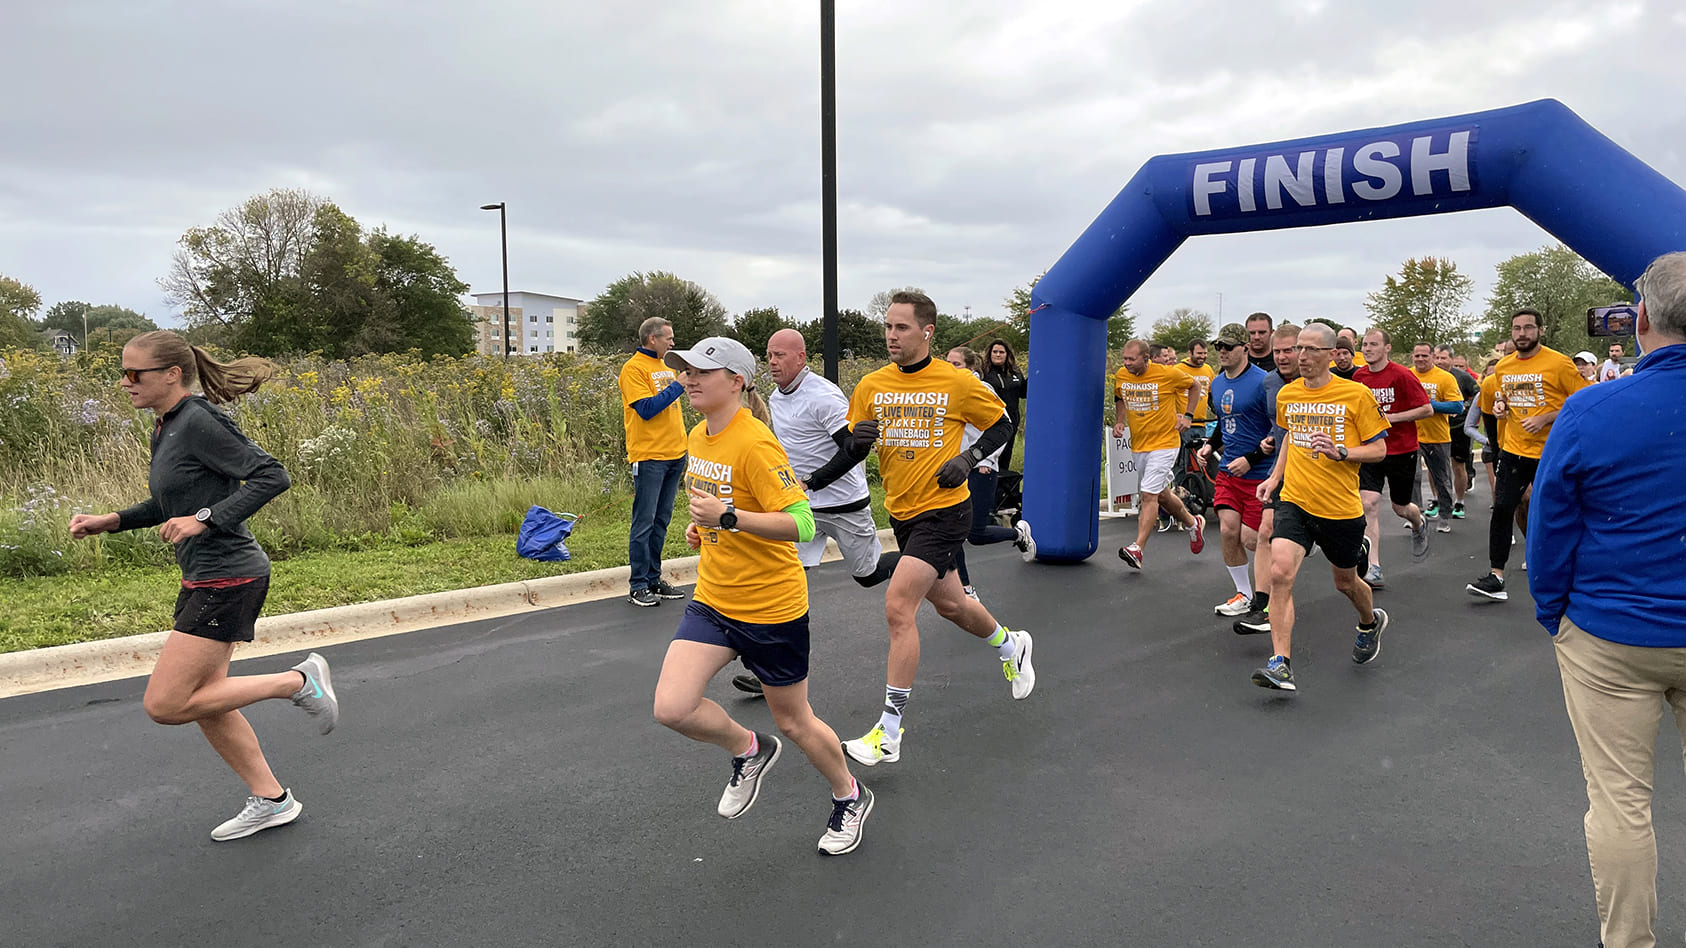 Oshkosh team members and community members crossing the finish line for a United Way outdoor run